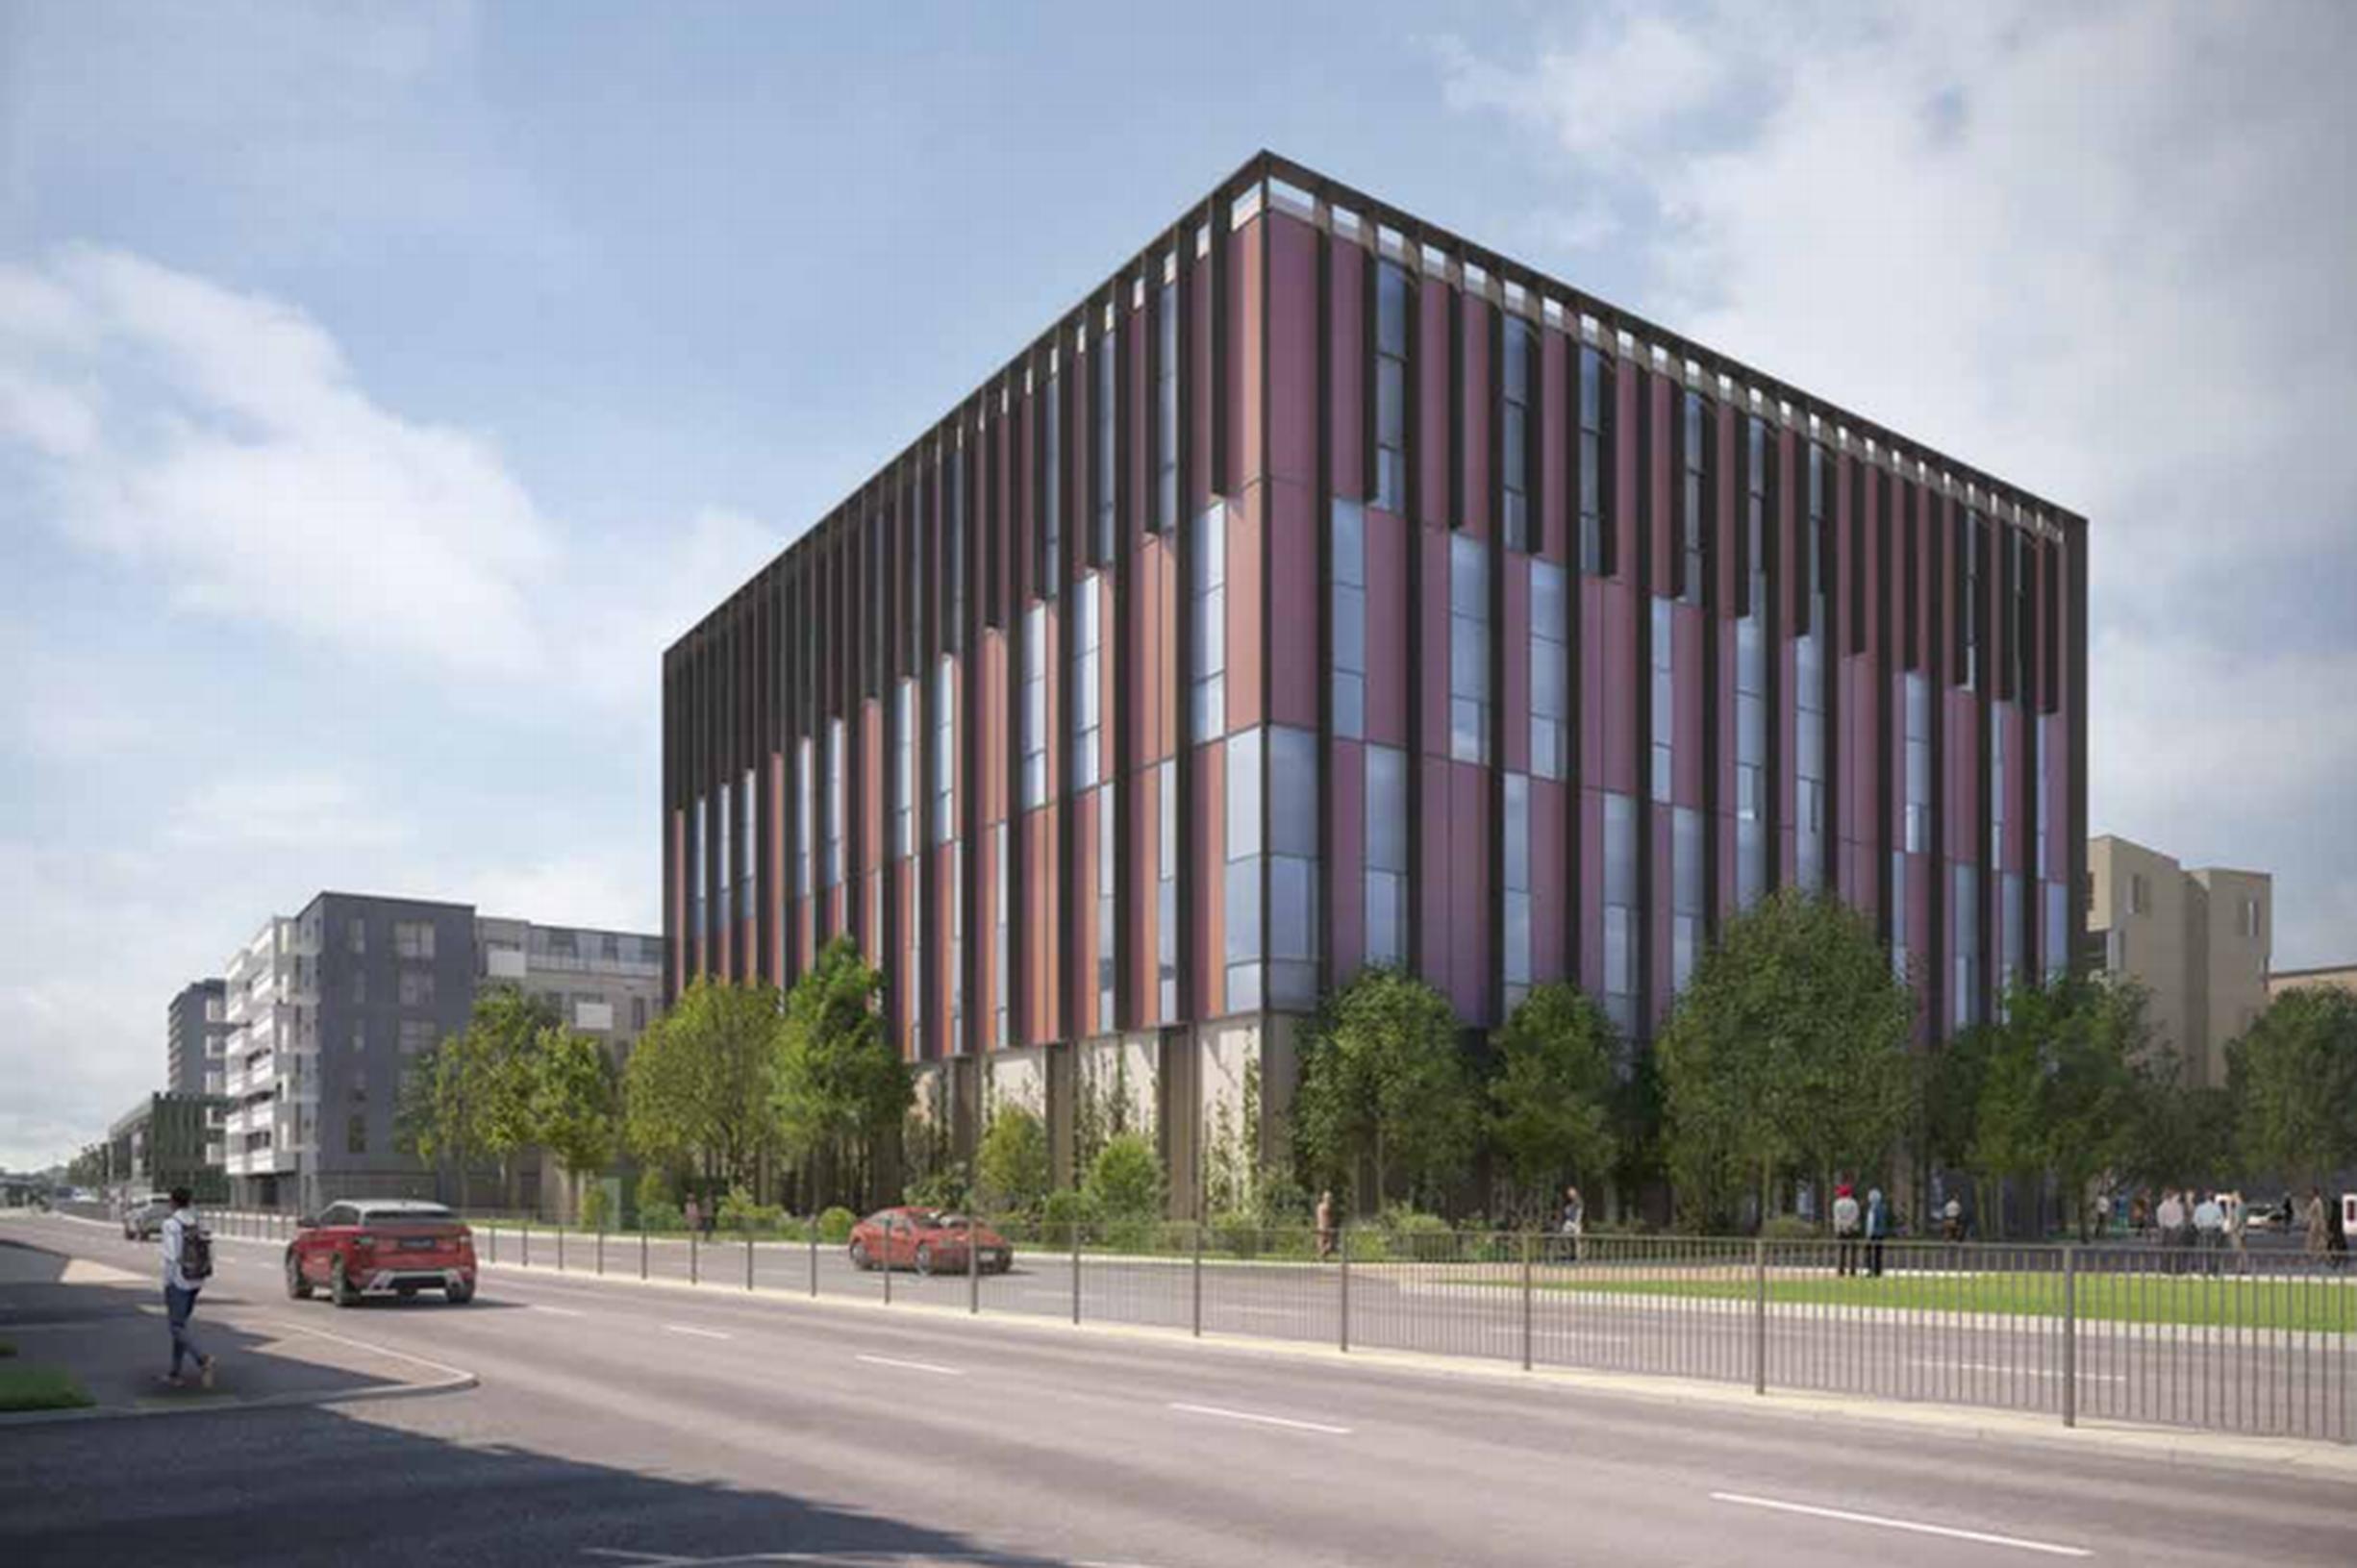 Biopharmaceutical company’s HQ to be built on Stevenage car park